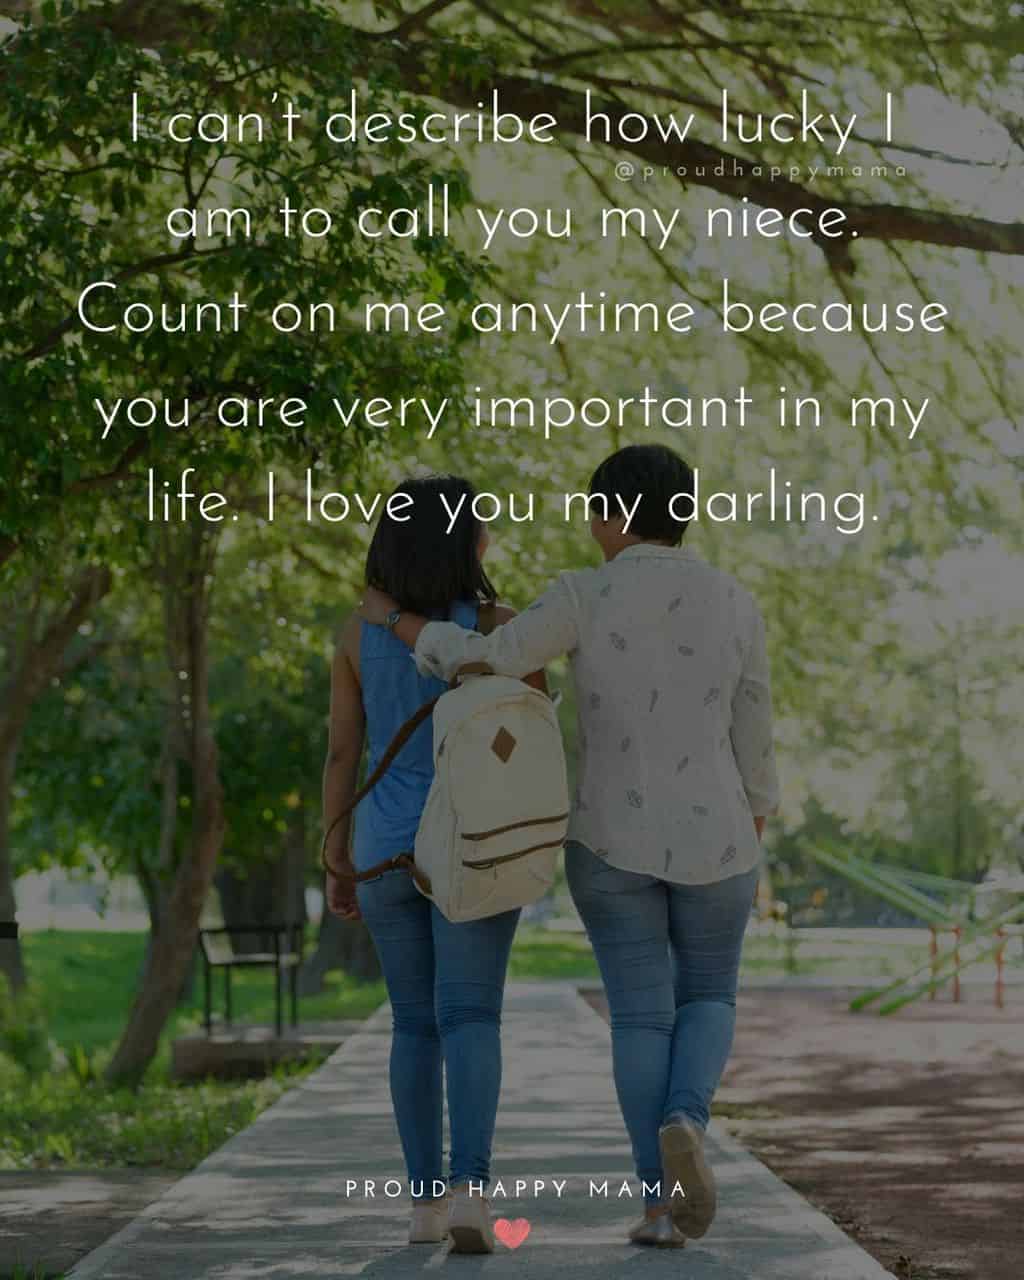 Niece Quotes - I cant describe how lucky I am to call you my niece. Count on me anytime because you are very important in my life. I love you my darling.